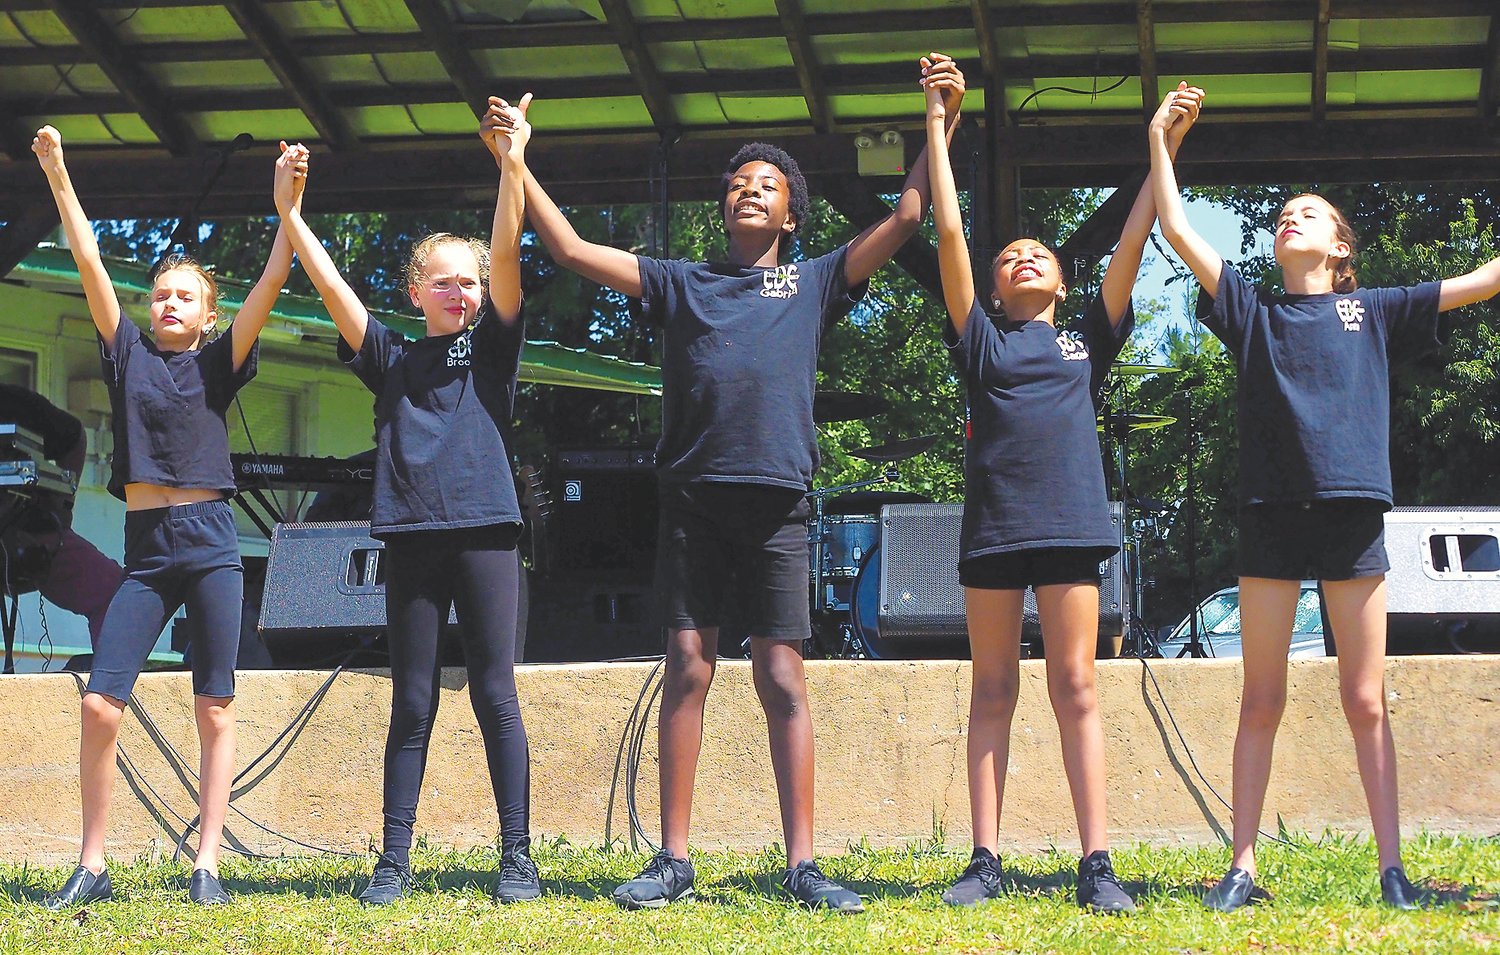 Local performers from Chatham Dance Connection dance to the music 'Glory' by John Legend on Saturday at the Chatham Co Fairgrounds in Pittsboro. This year, the Juneteenth celebration lasted both Saturday and Sunday.